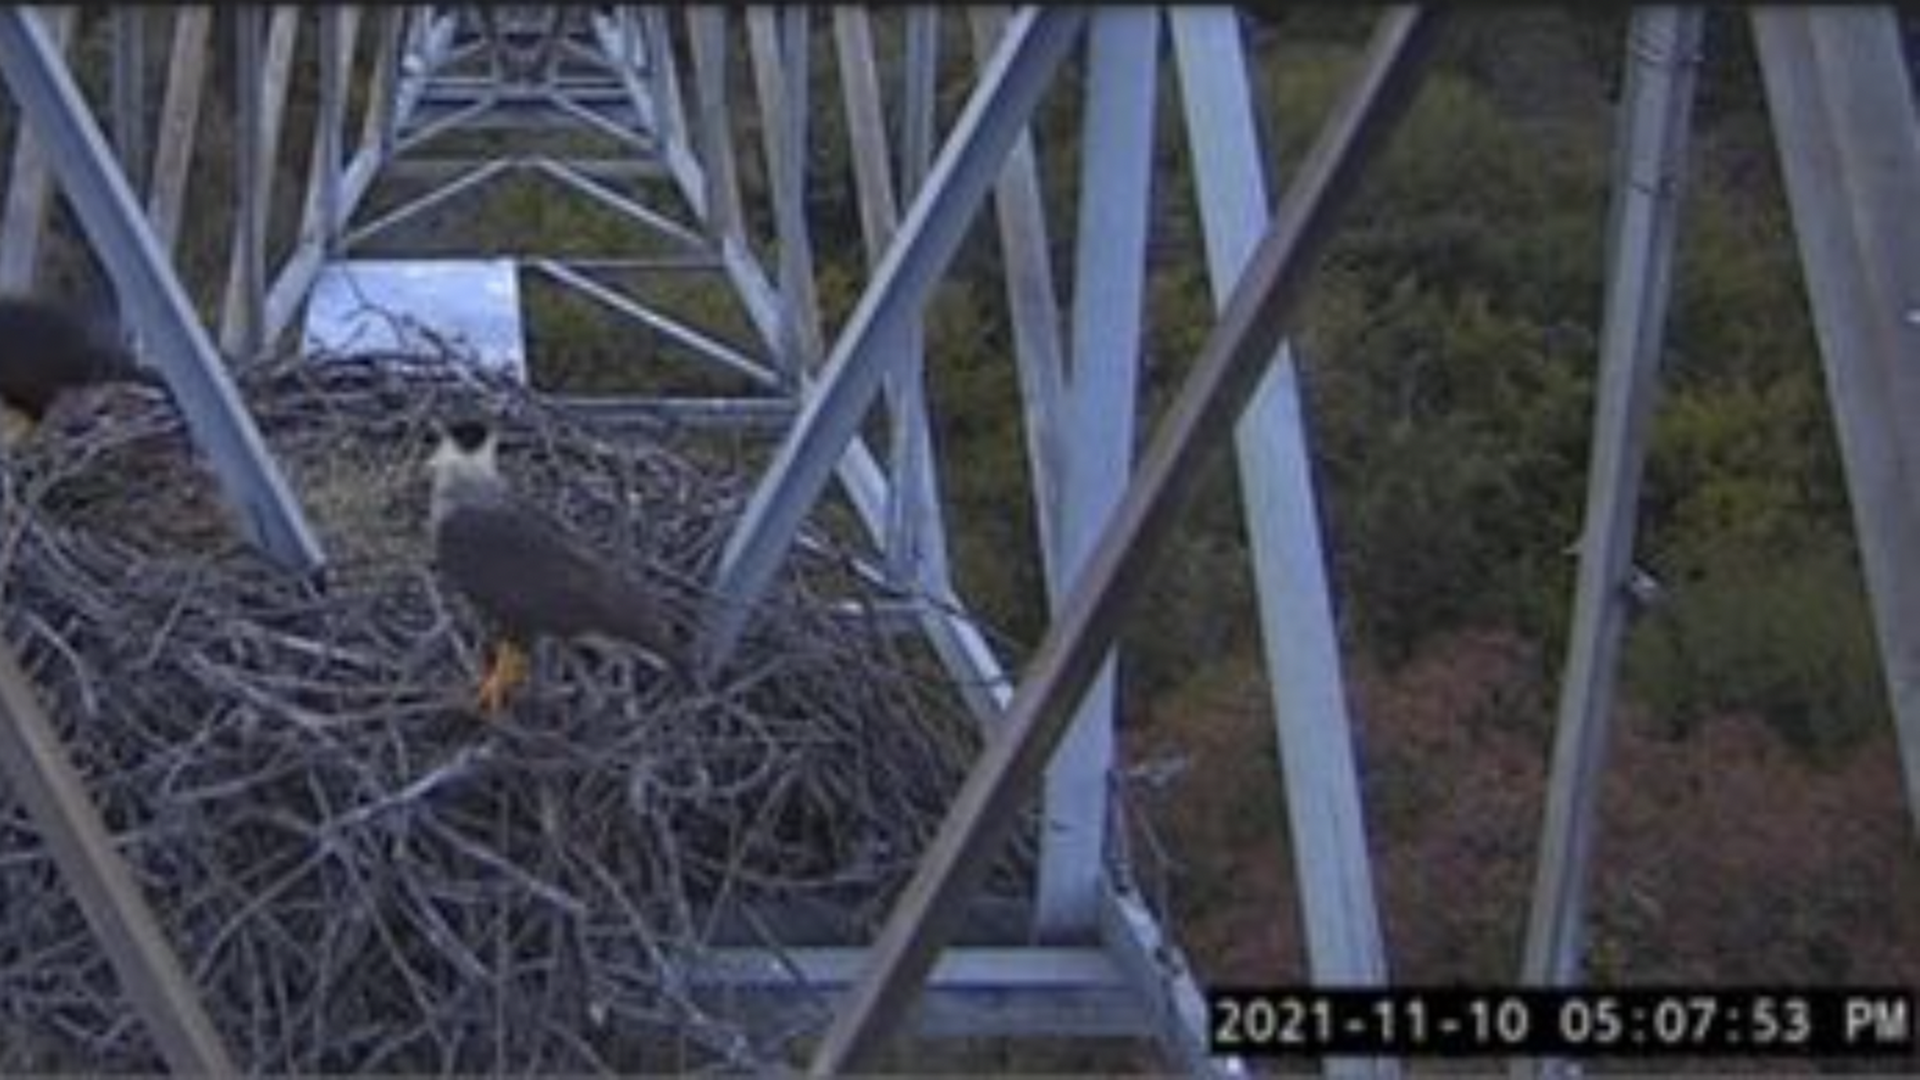 Two falcons sitting in an eagle's nest